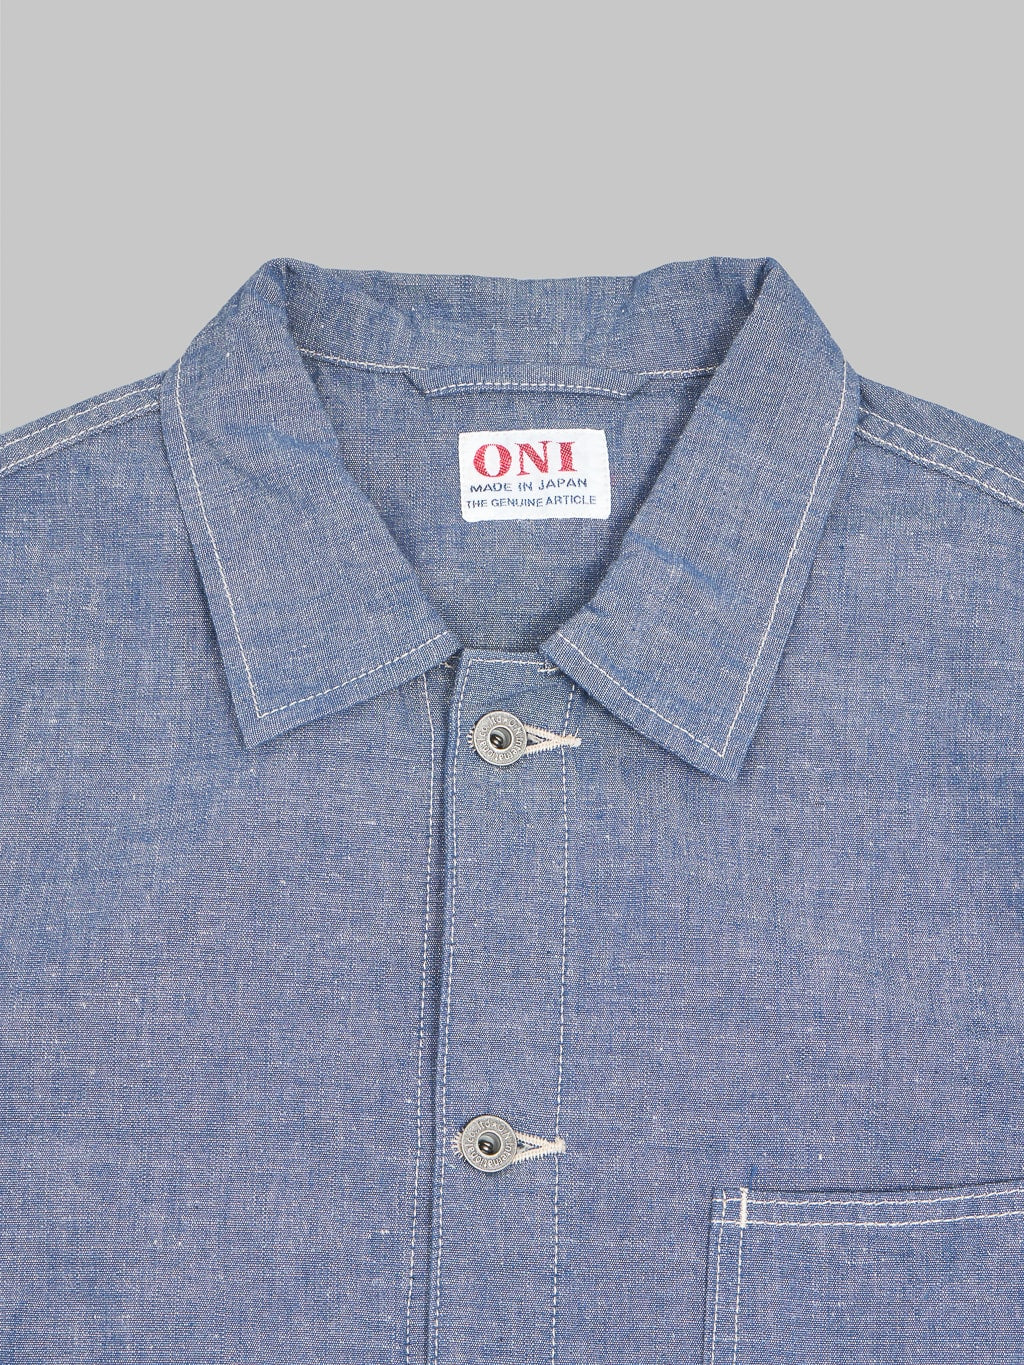 Oni denim heavy chambray blue gray coverall collar details